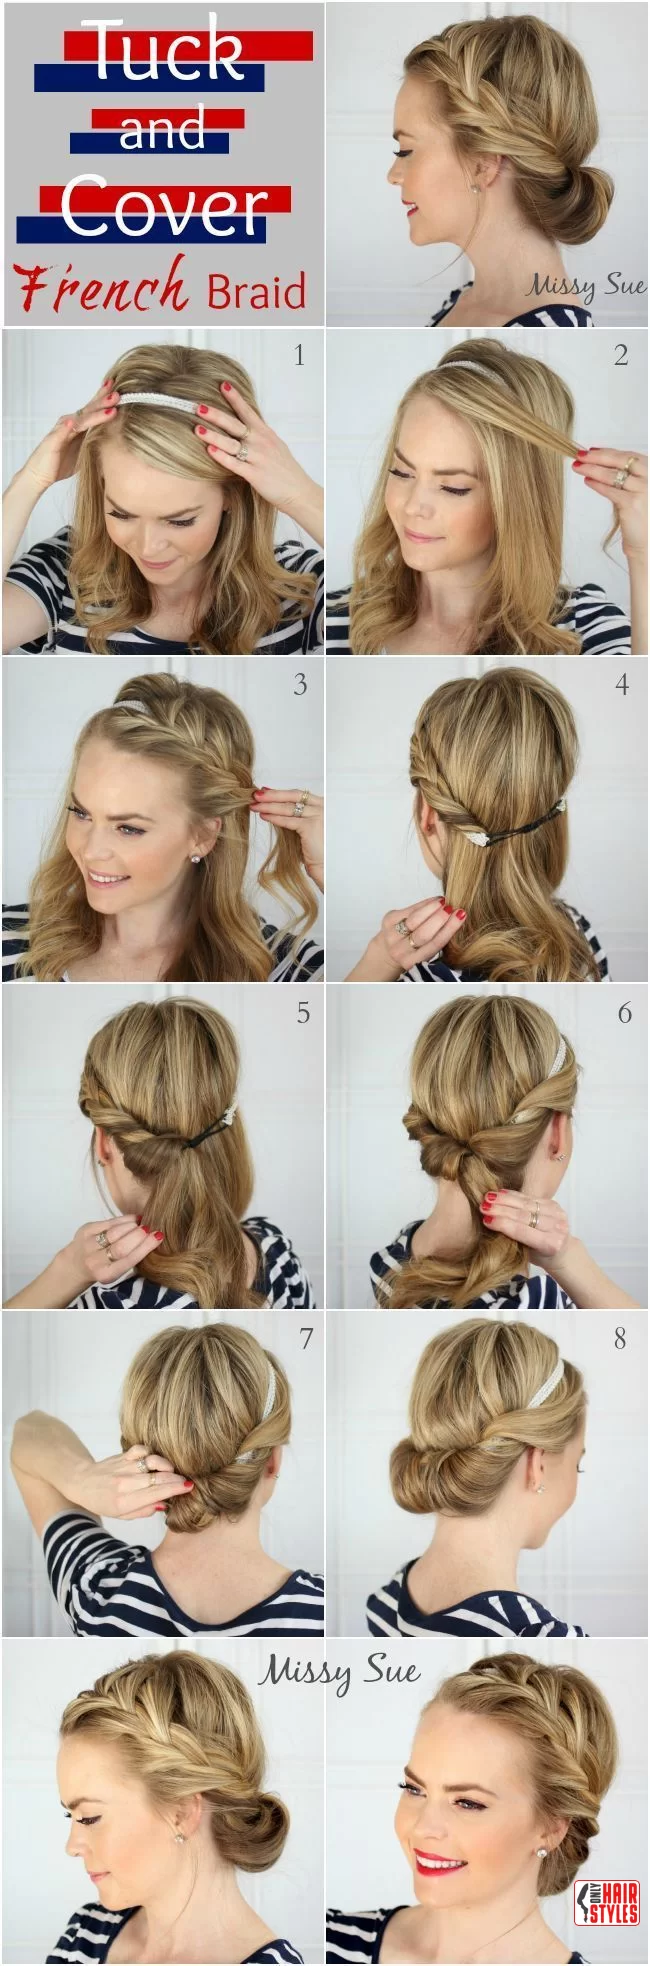 French Braid for Long Hair | 10 Easy Step By Step Hair Tutorials For Chic Hairstyles